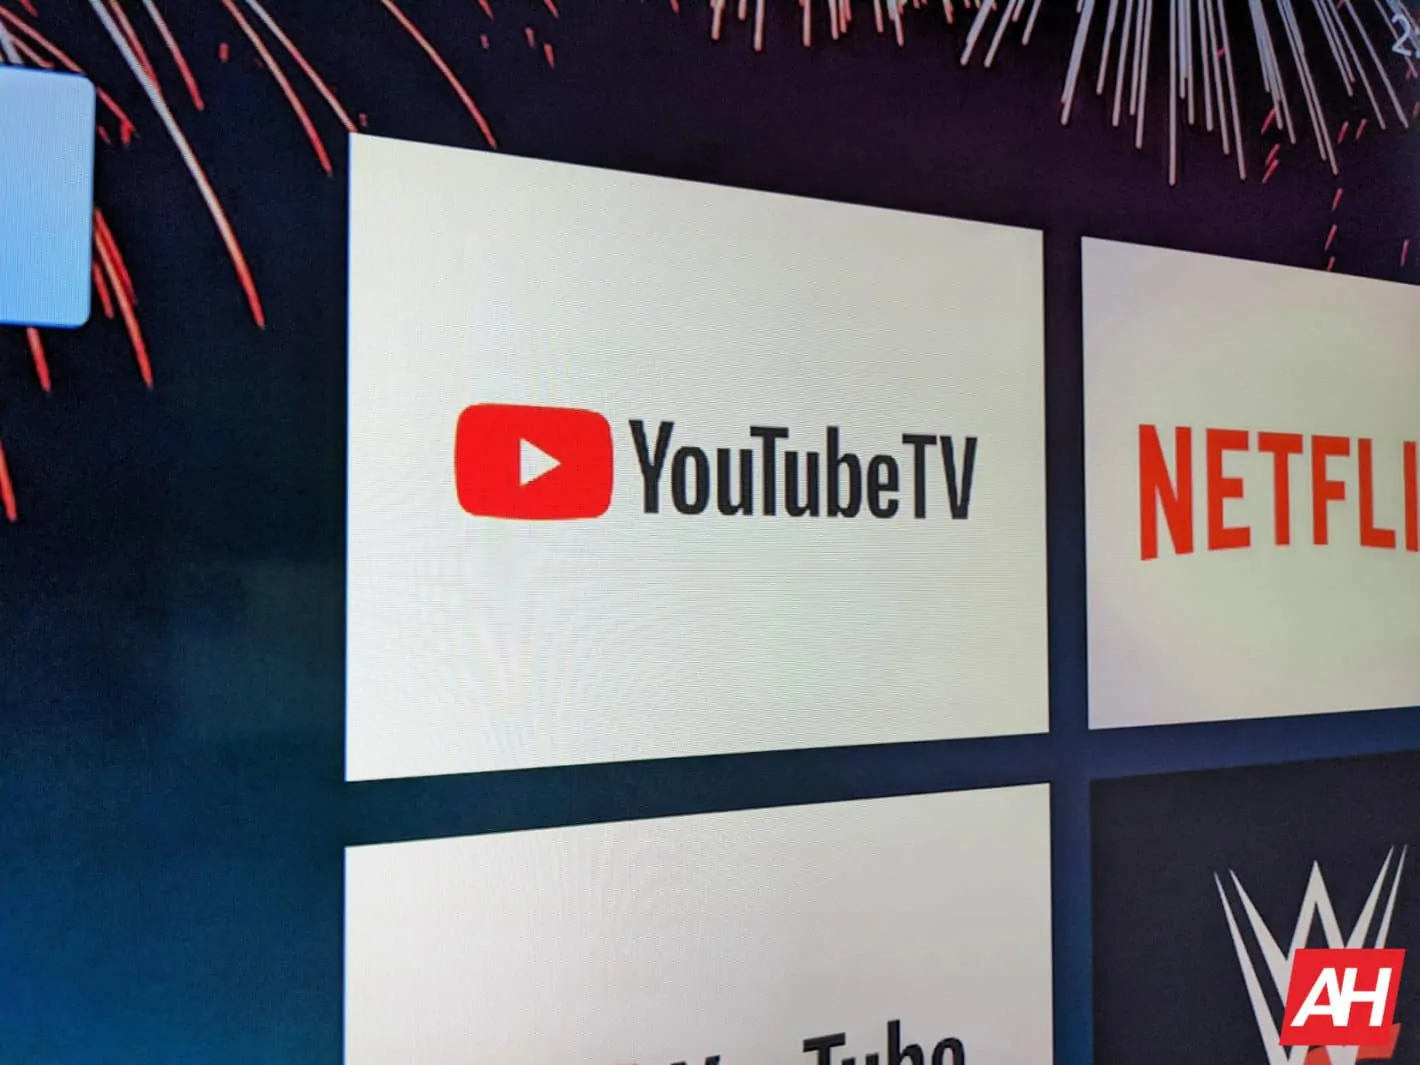 Featured image for YouTube TV revamps the comment section to be unobtrusive